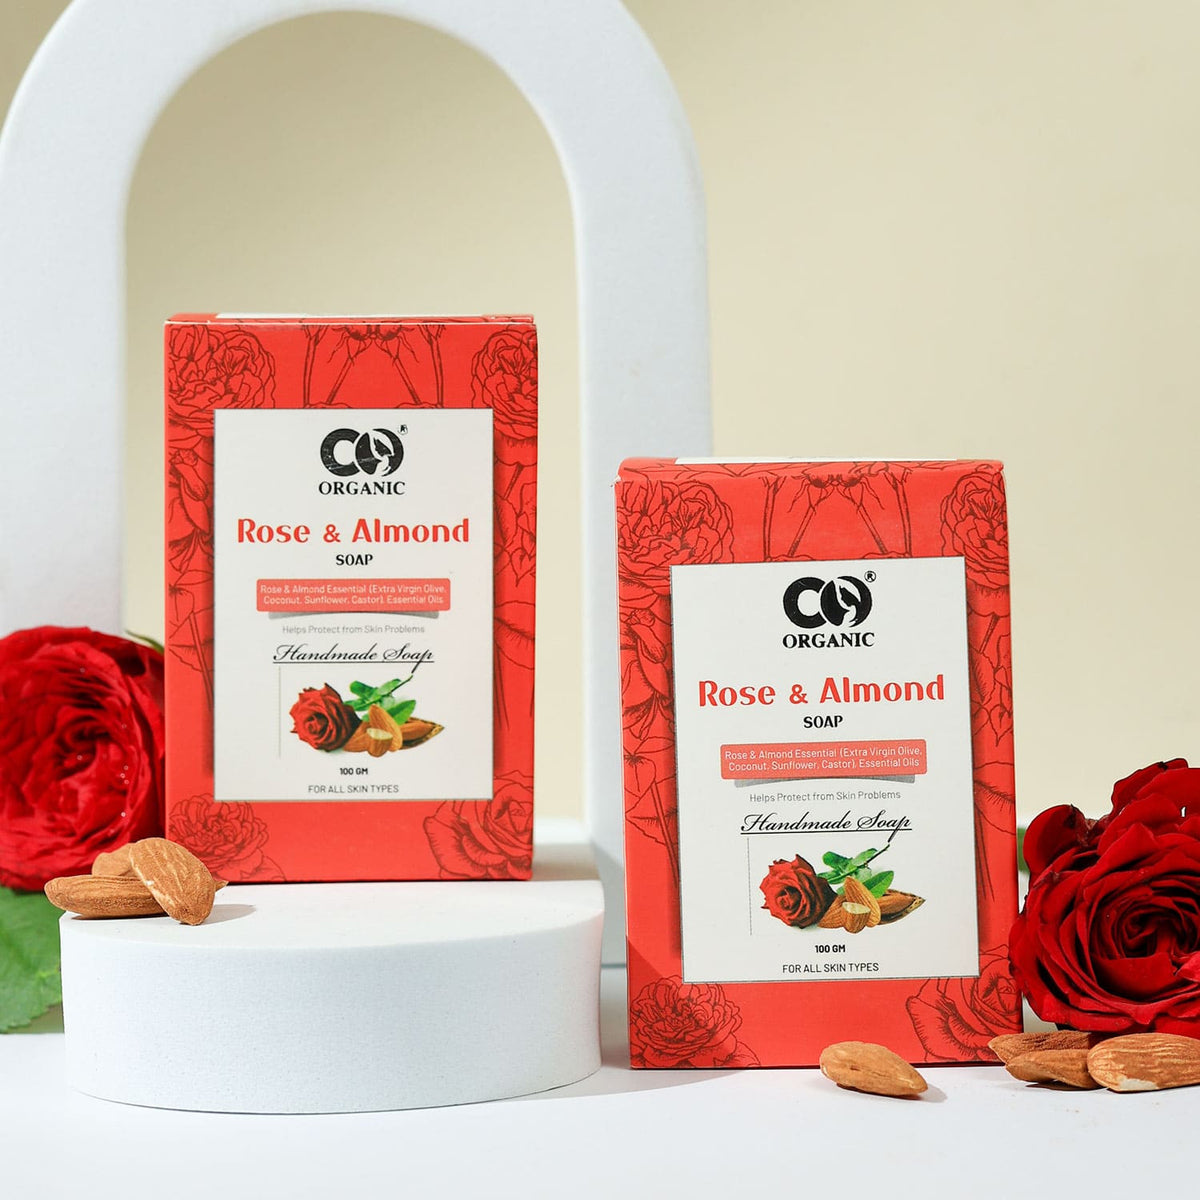 Co Organic Rose & Almond Soap - Pack of 2